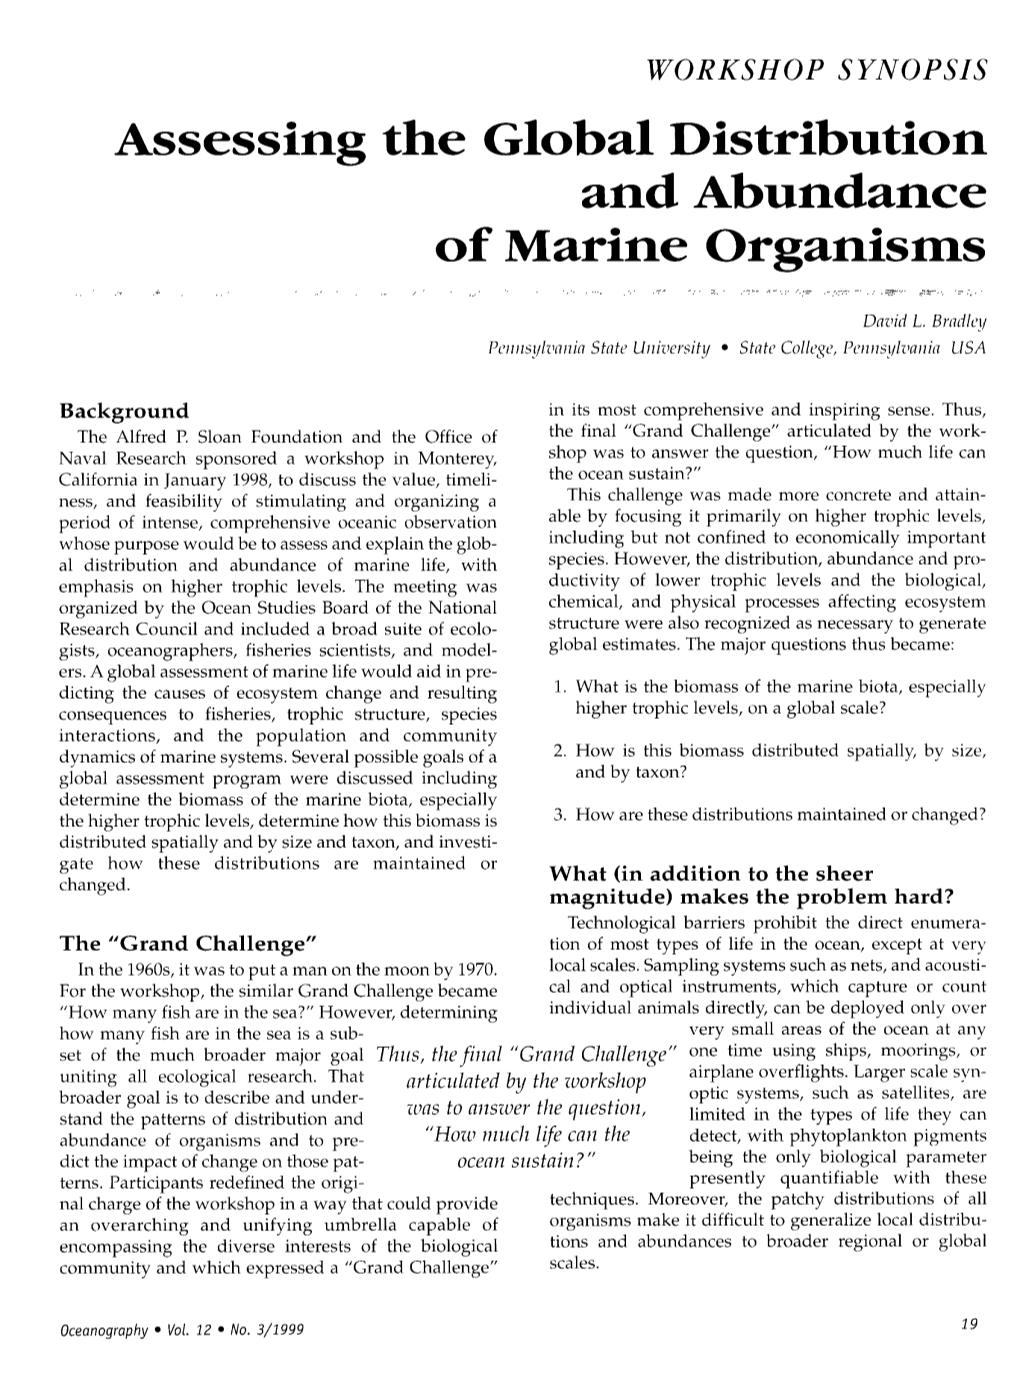 Assessing the Global Distribution and Abundance of Marine Organisms